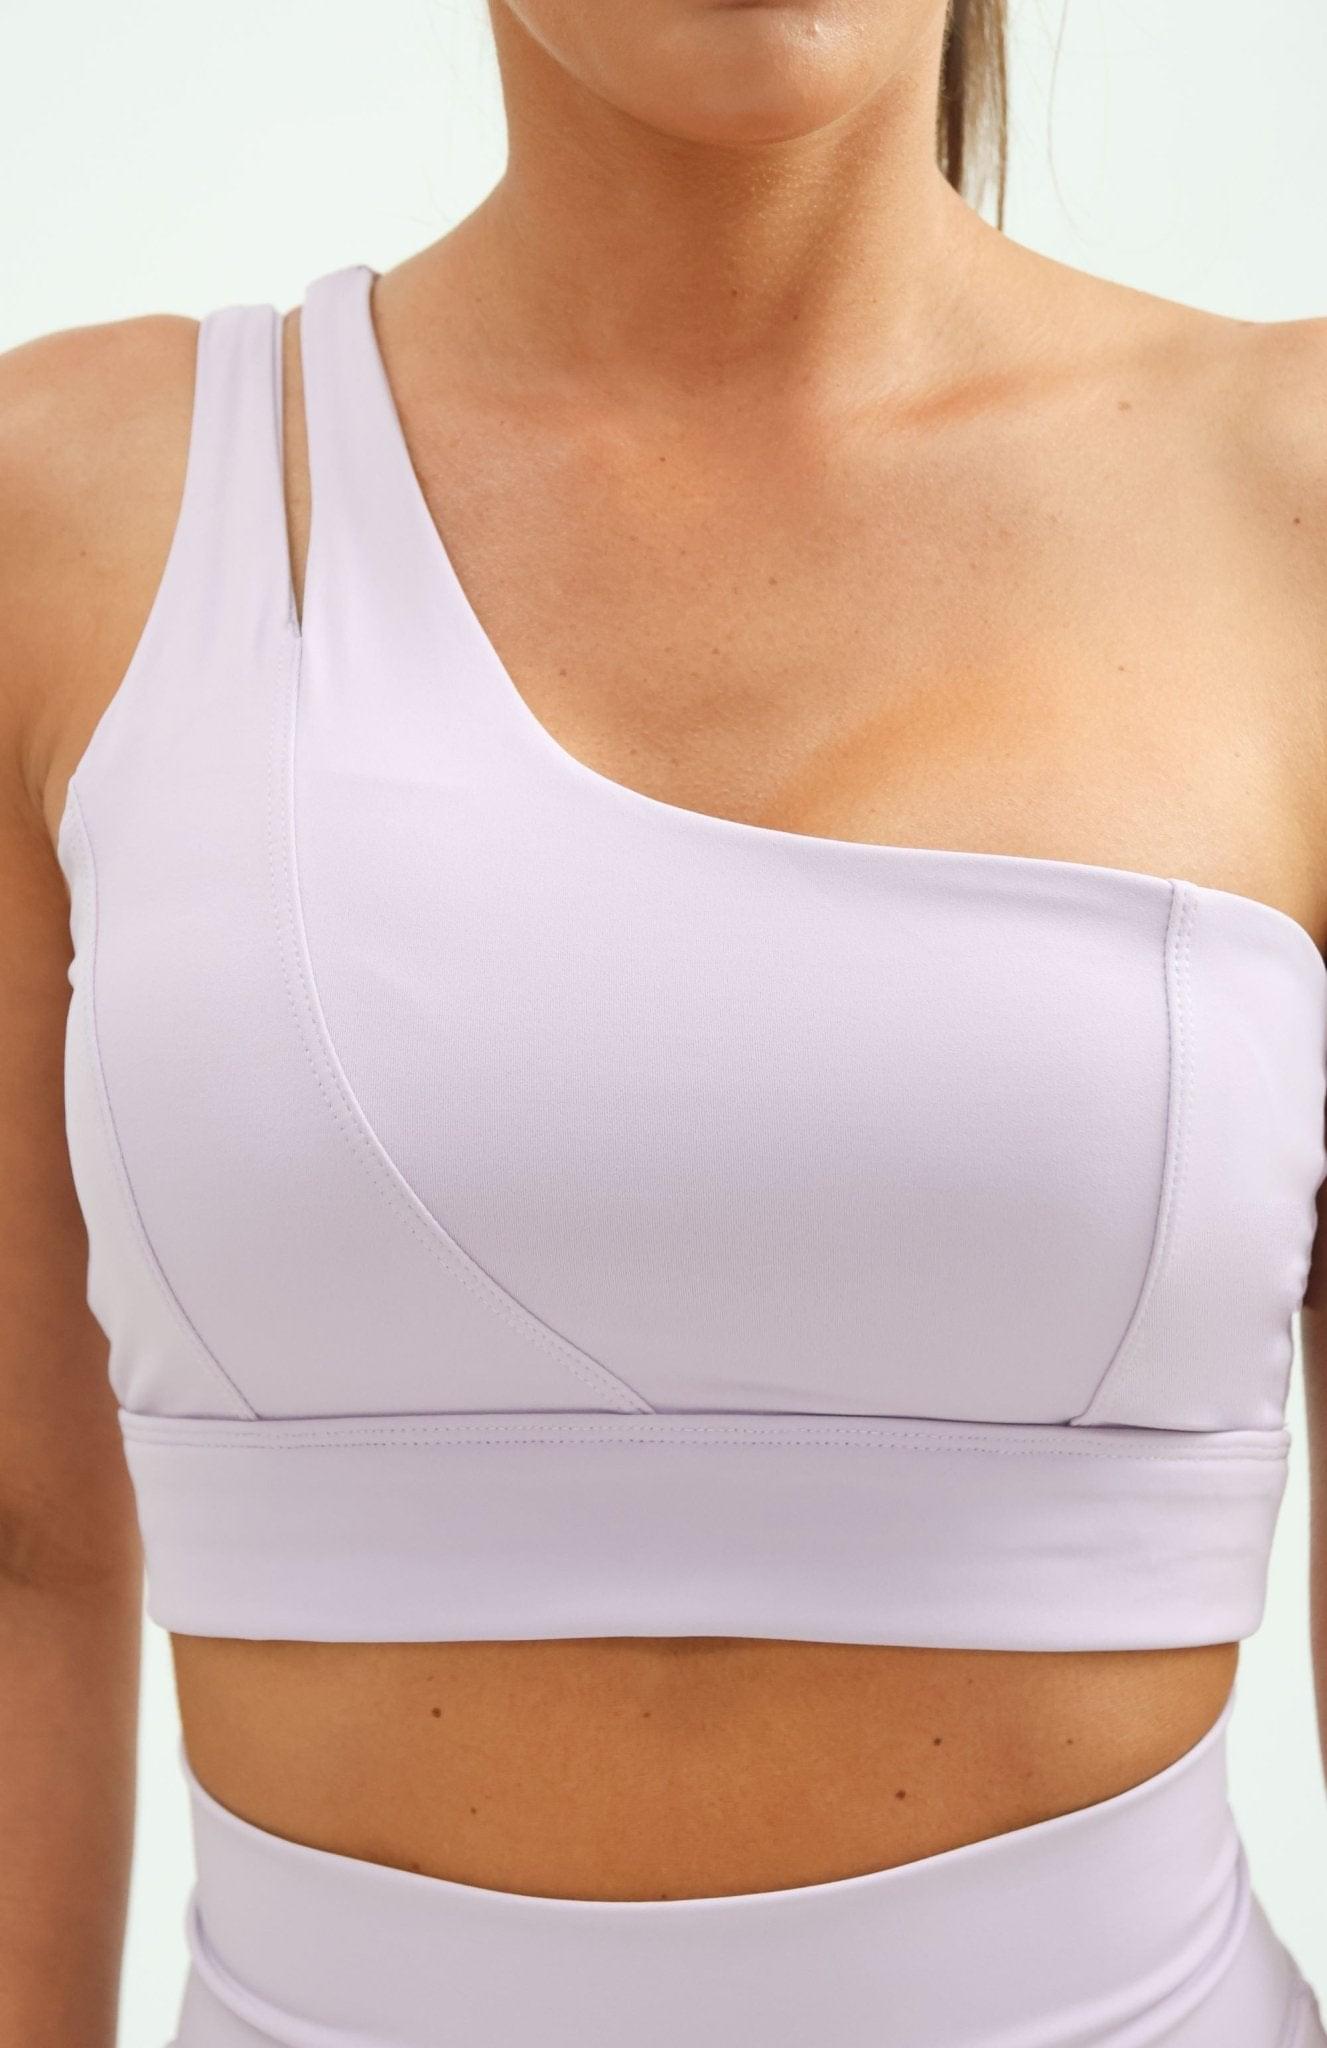 Shop Sports Bras for Women At Hermosa Athletica